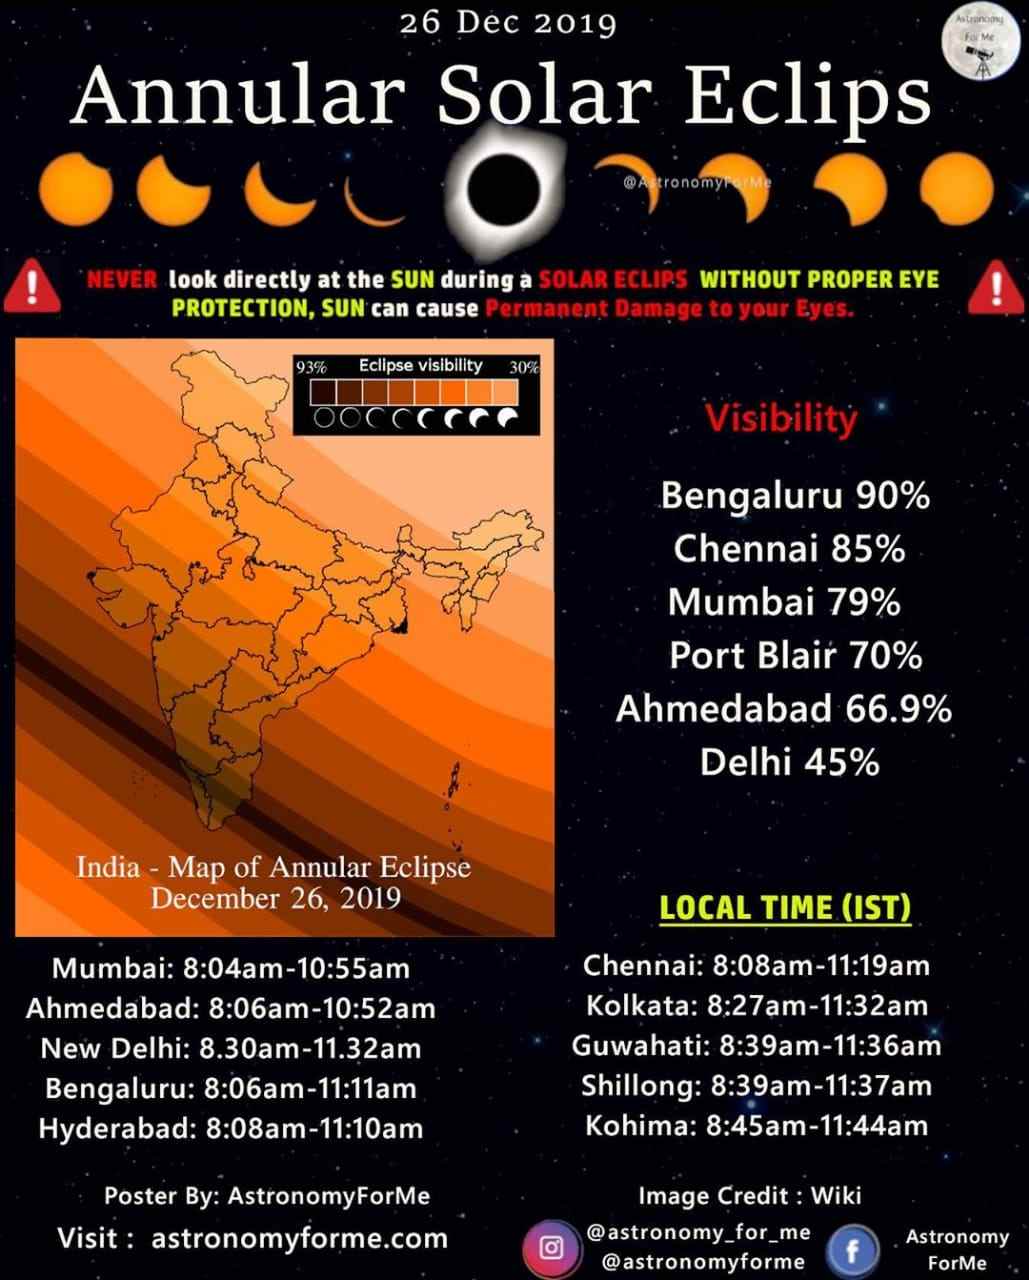 Regional timings for the 26 Dec Solar eclipse. Image courtesy: AstronomyForMe